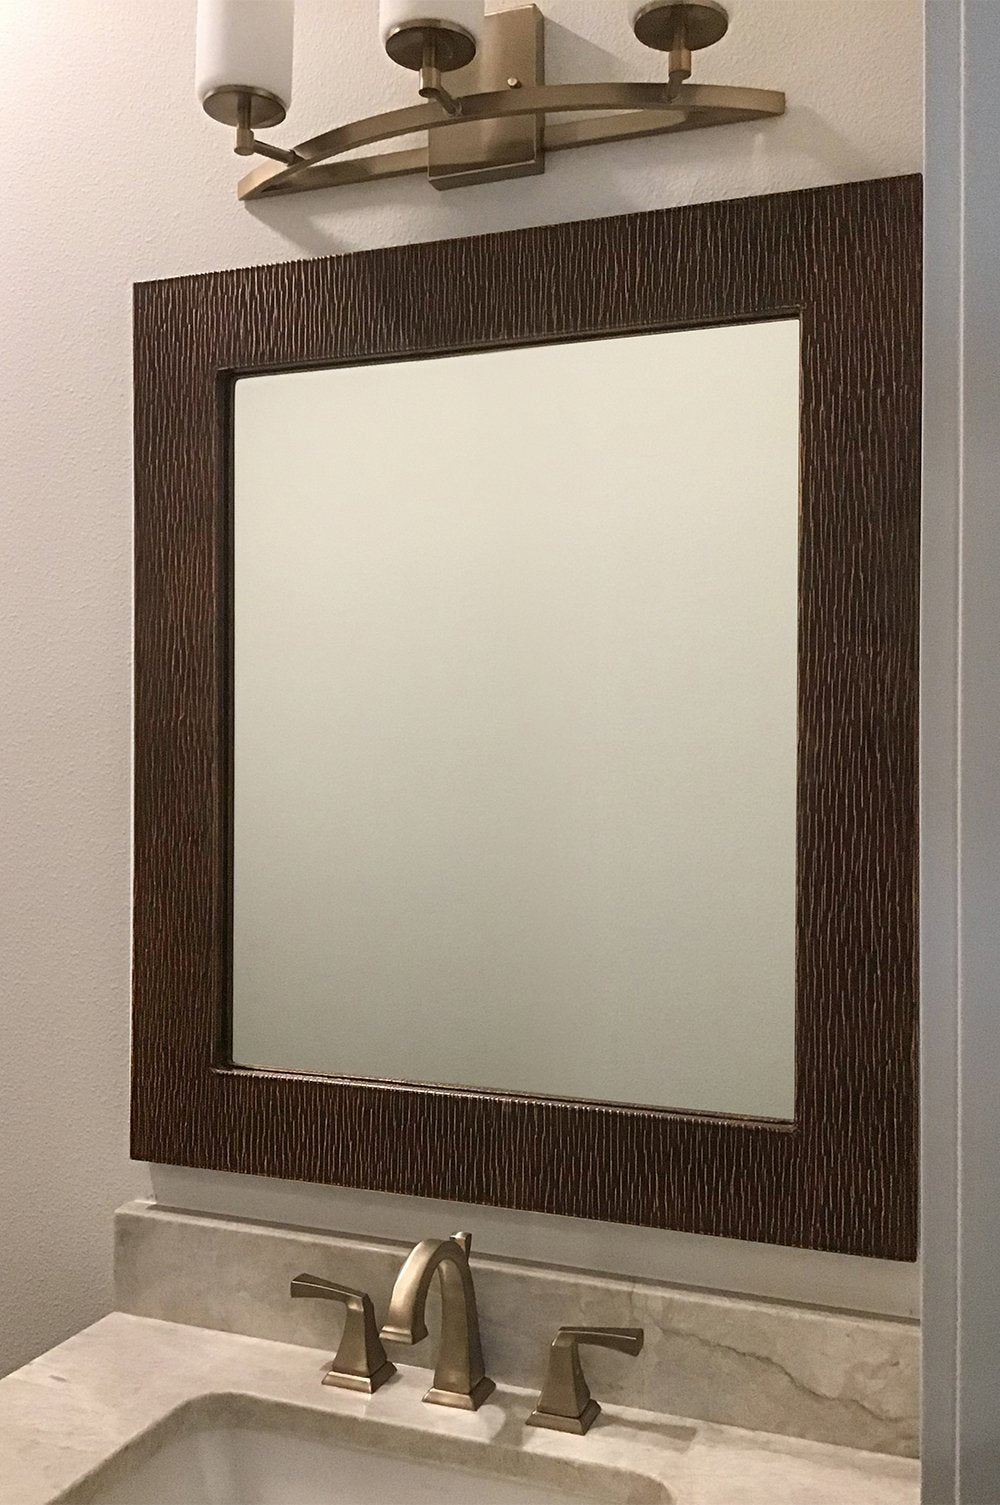 Premier Copper 36 in. Rectangle Hammered Copper Mirror